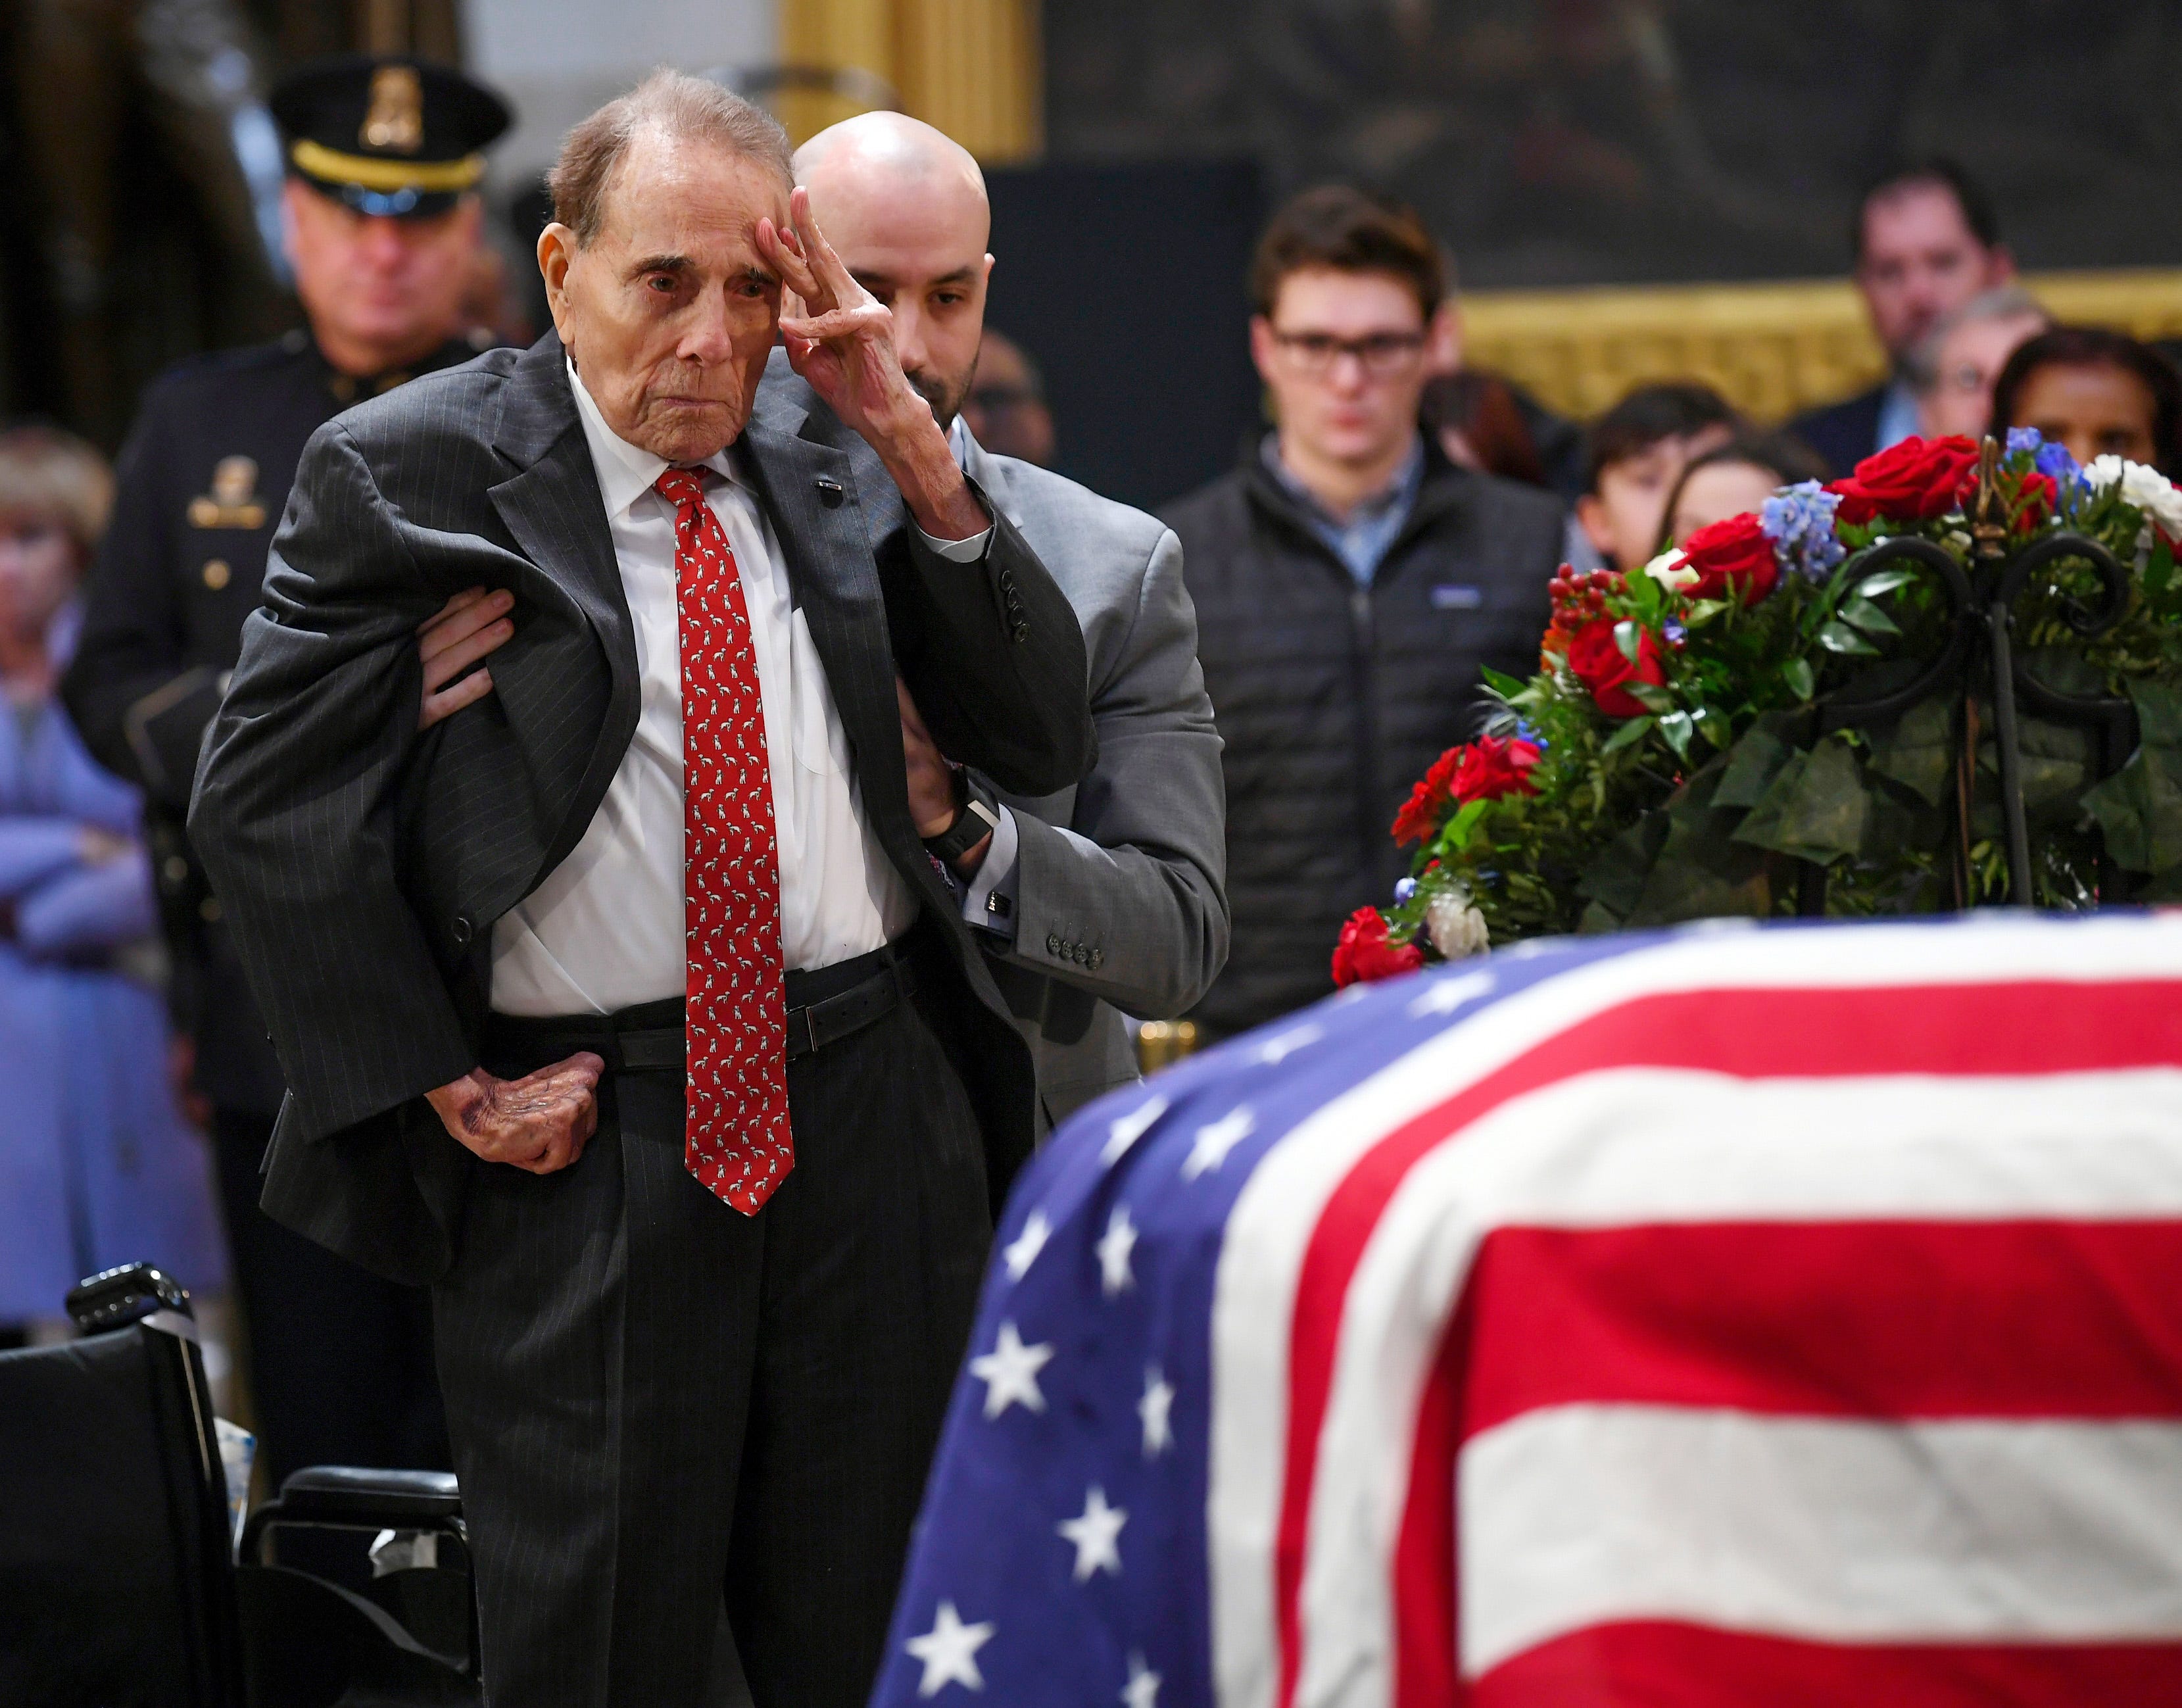 Bob Dole saluted a fellow World War II veteran under the Capitol dome as he rose to honor George H.W. Bush, Dec. 4, 2018. 
Dole, the 95-year-old former Senate majority leader, relied on an aide to help him stand on the floor of the Capitol rotunda before offering his gesture beside the casket of Bush, his onetime rival in the 1988 Republican presidential primary. Bush's spokesman, Jim McGrath, described the salute as "a last, powerful gesture of respect from one member of the Greatest Generation, @SenatorDole, to another."Dole was among mourners filing into the rotunda to pay respects to Bush on day two of his lying in state, a day that also drew Colin Powell, his former Joint Chiefs of Staff chairman, and Sully, the yellow Labrador who worked as the former president's service dog.